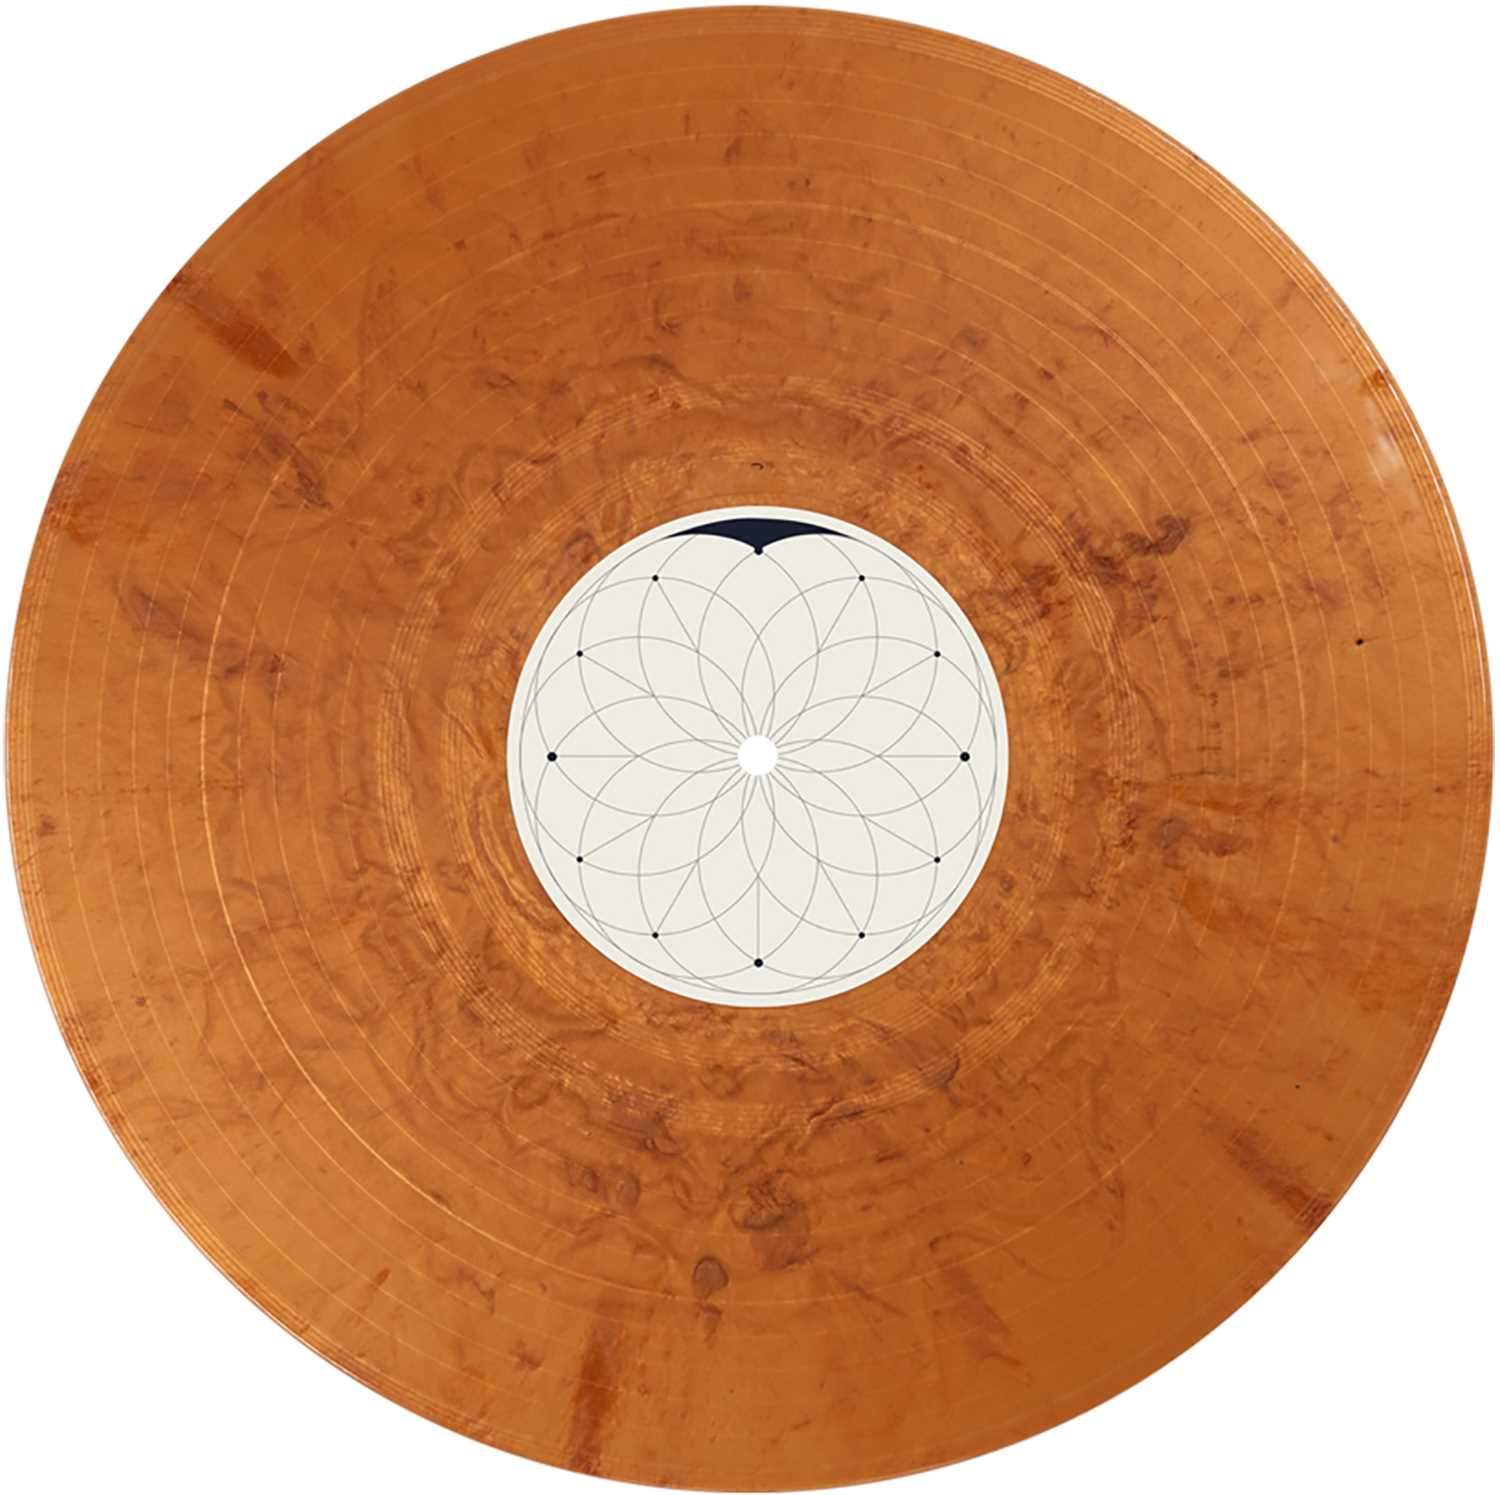 Serato 2x12-Inch Sacred Geometry Limited Edition Control Vinyl - PSSL ProSound and Stage Lighting